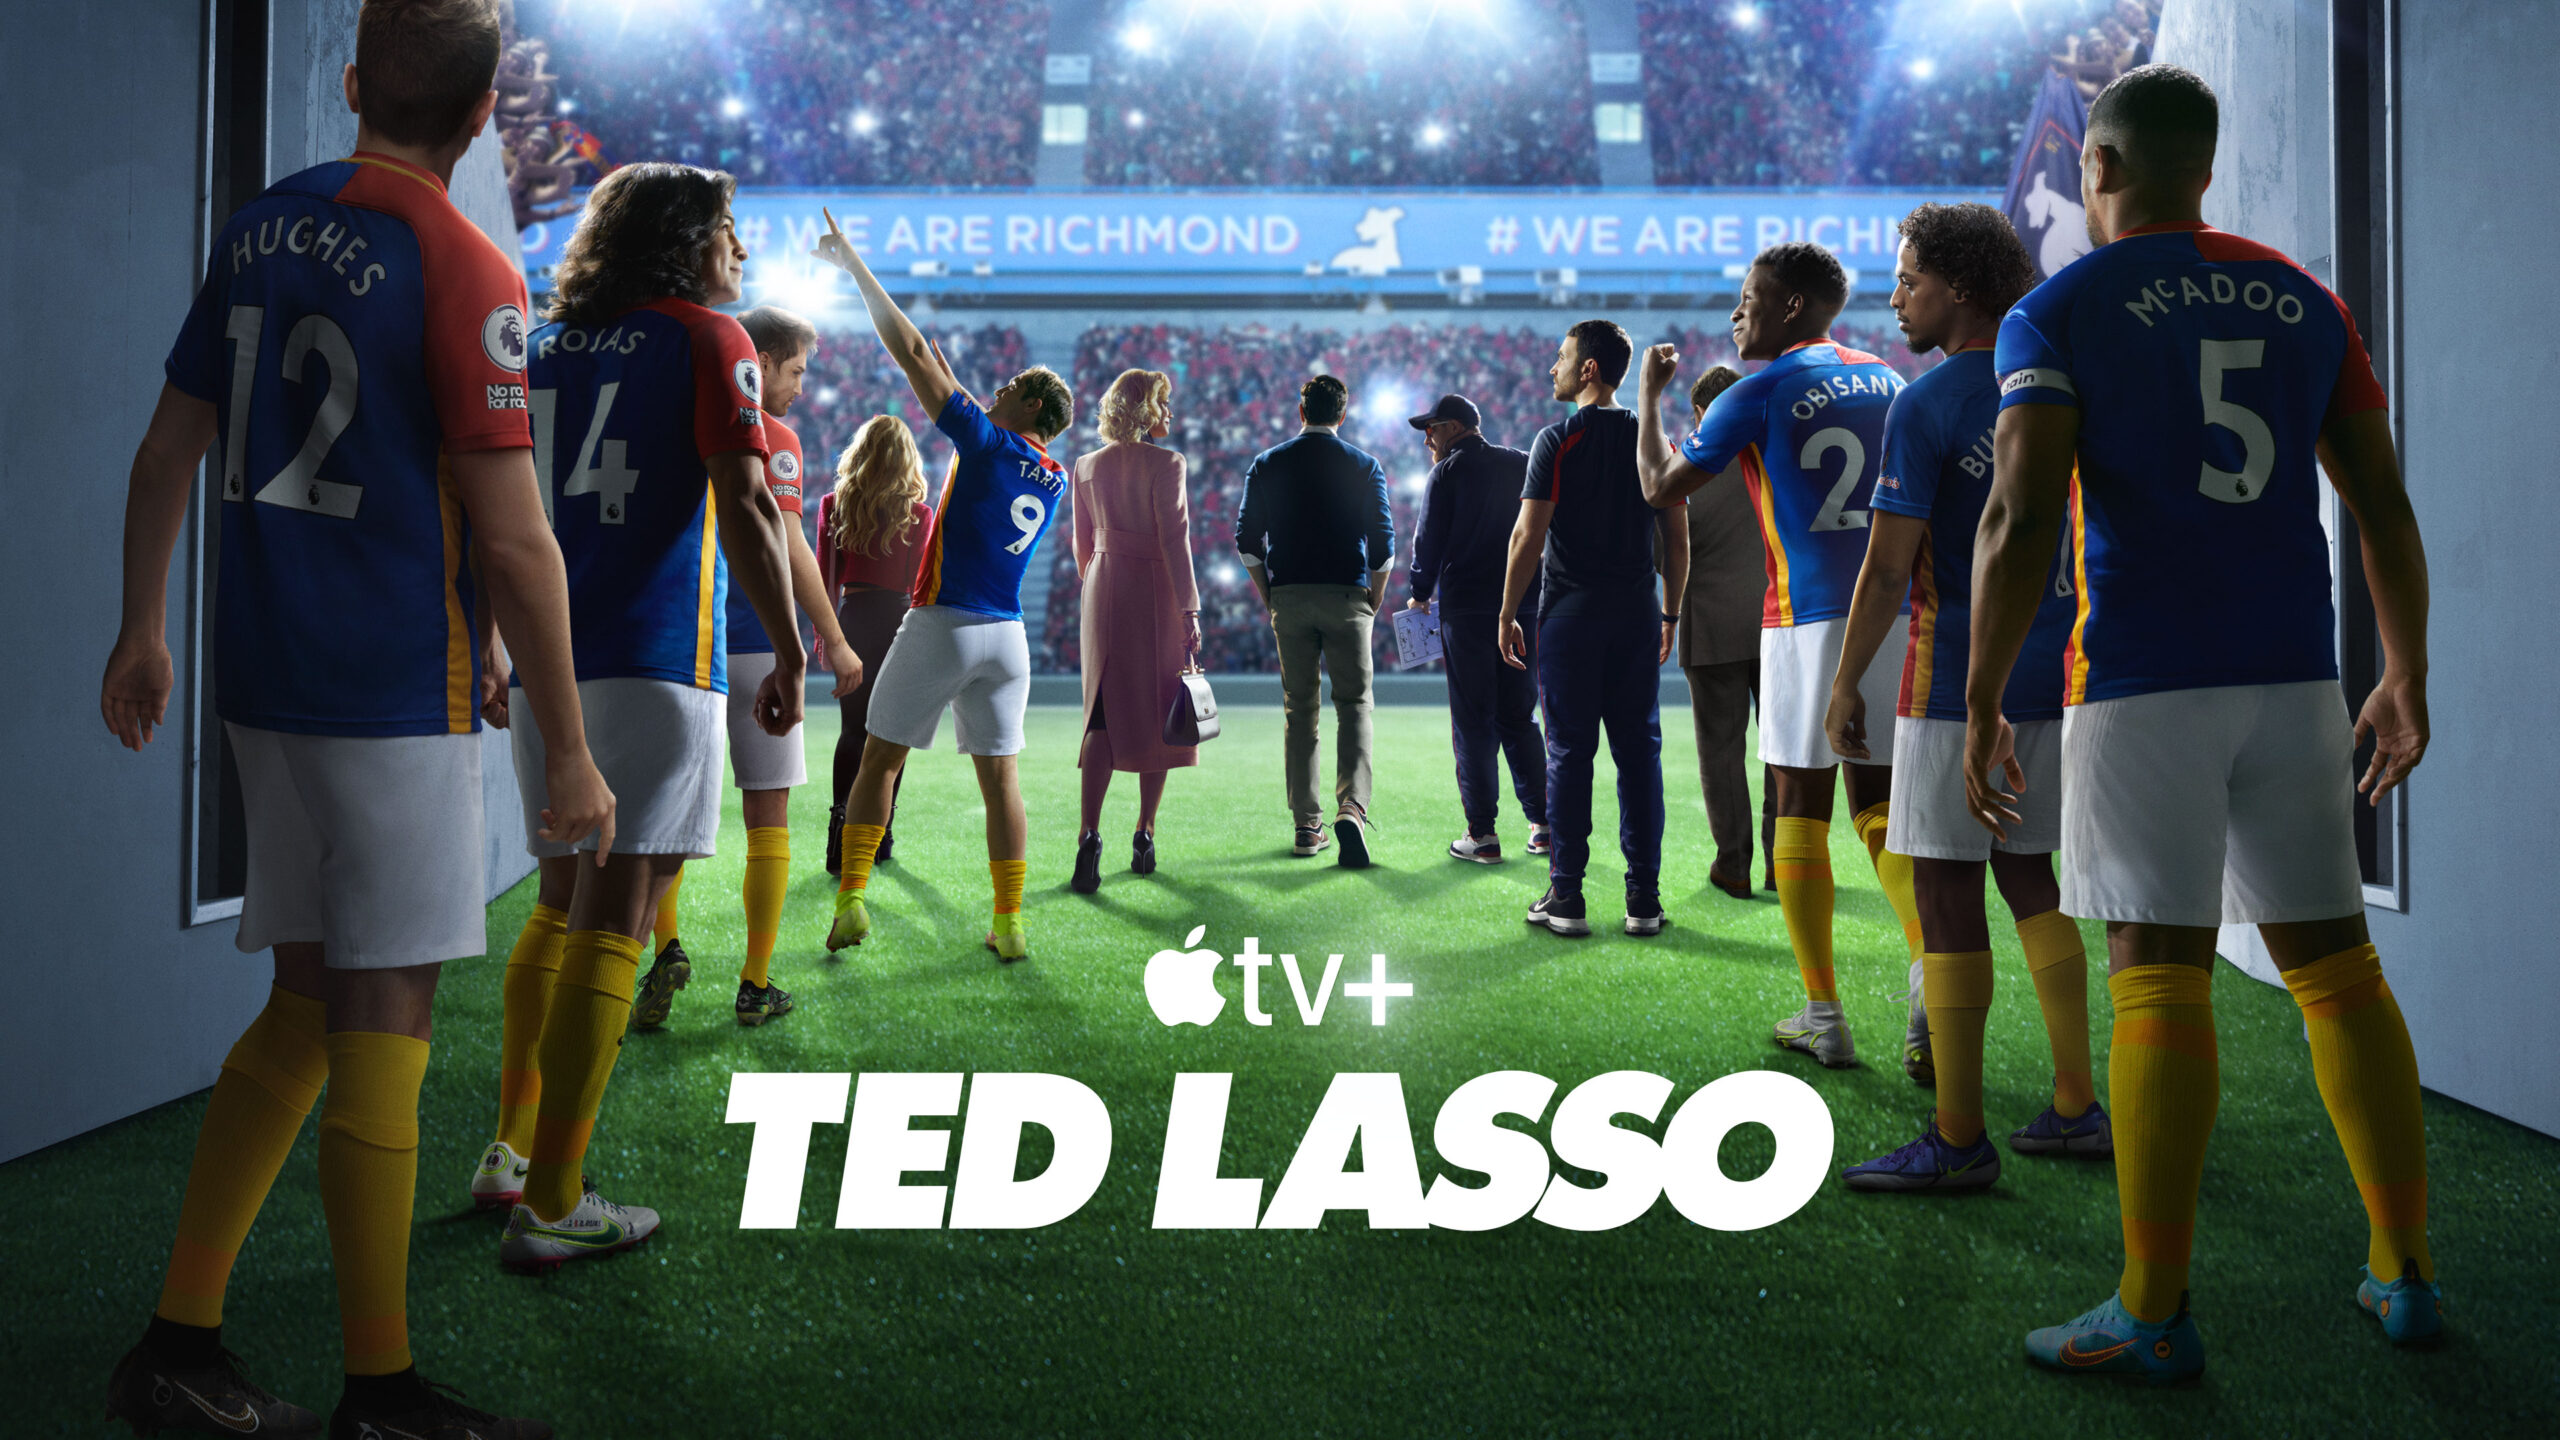 Ted Lasso (stagione 3) - Poster